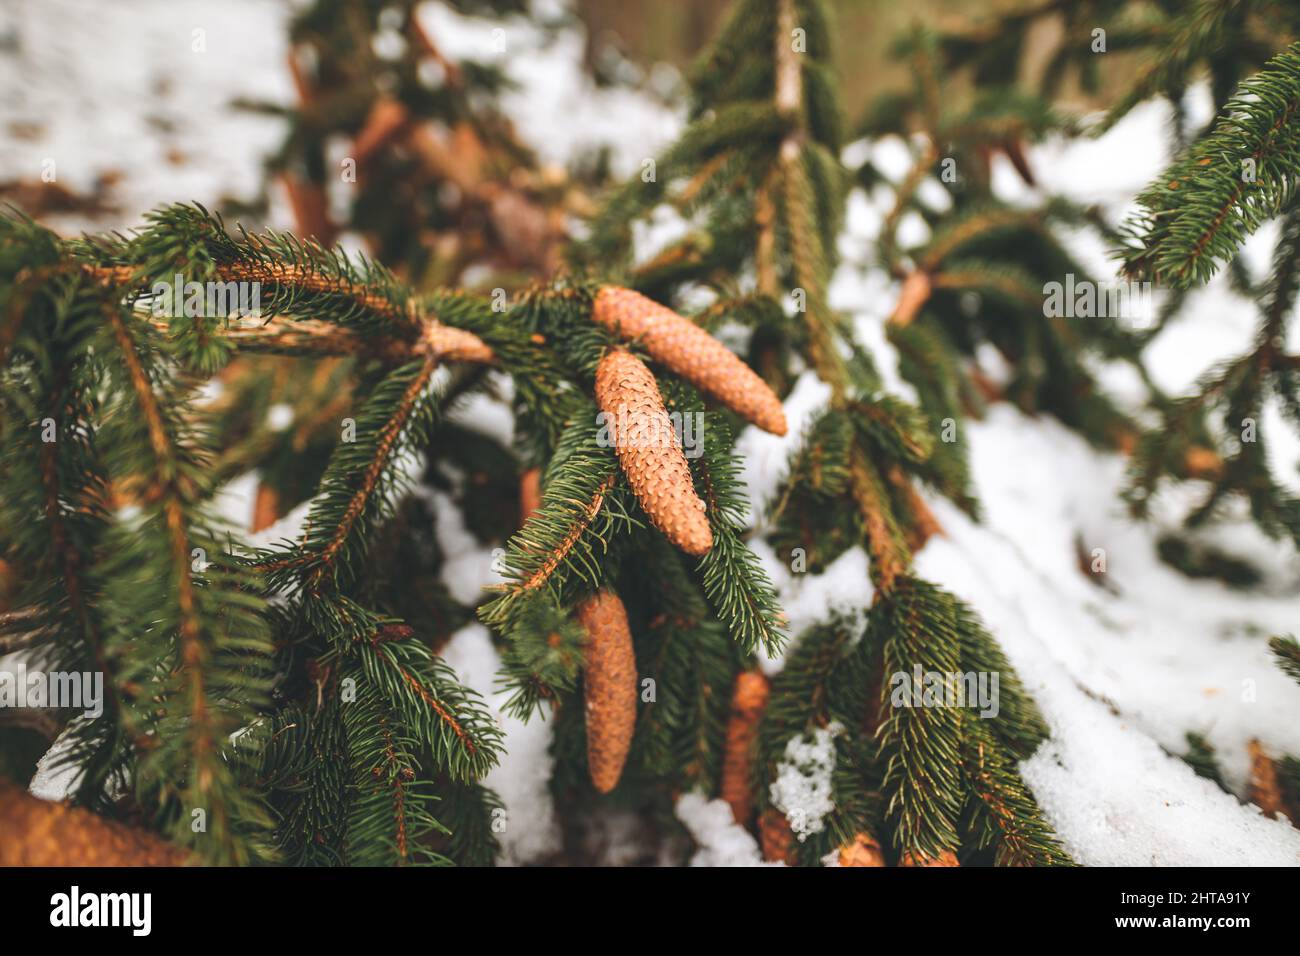 Closeup of a Picea abies branch with cones Stock Photo